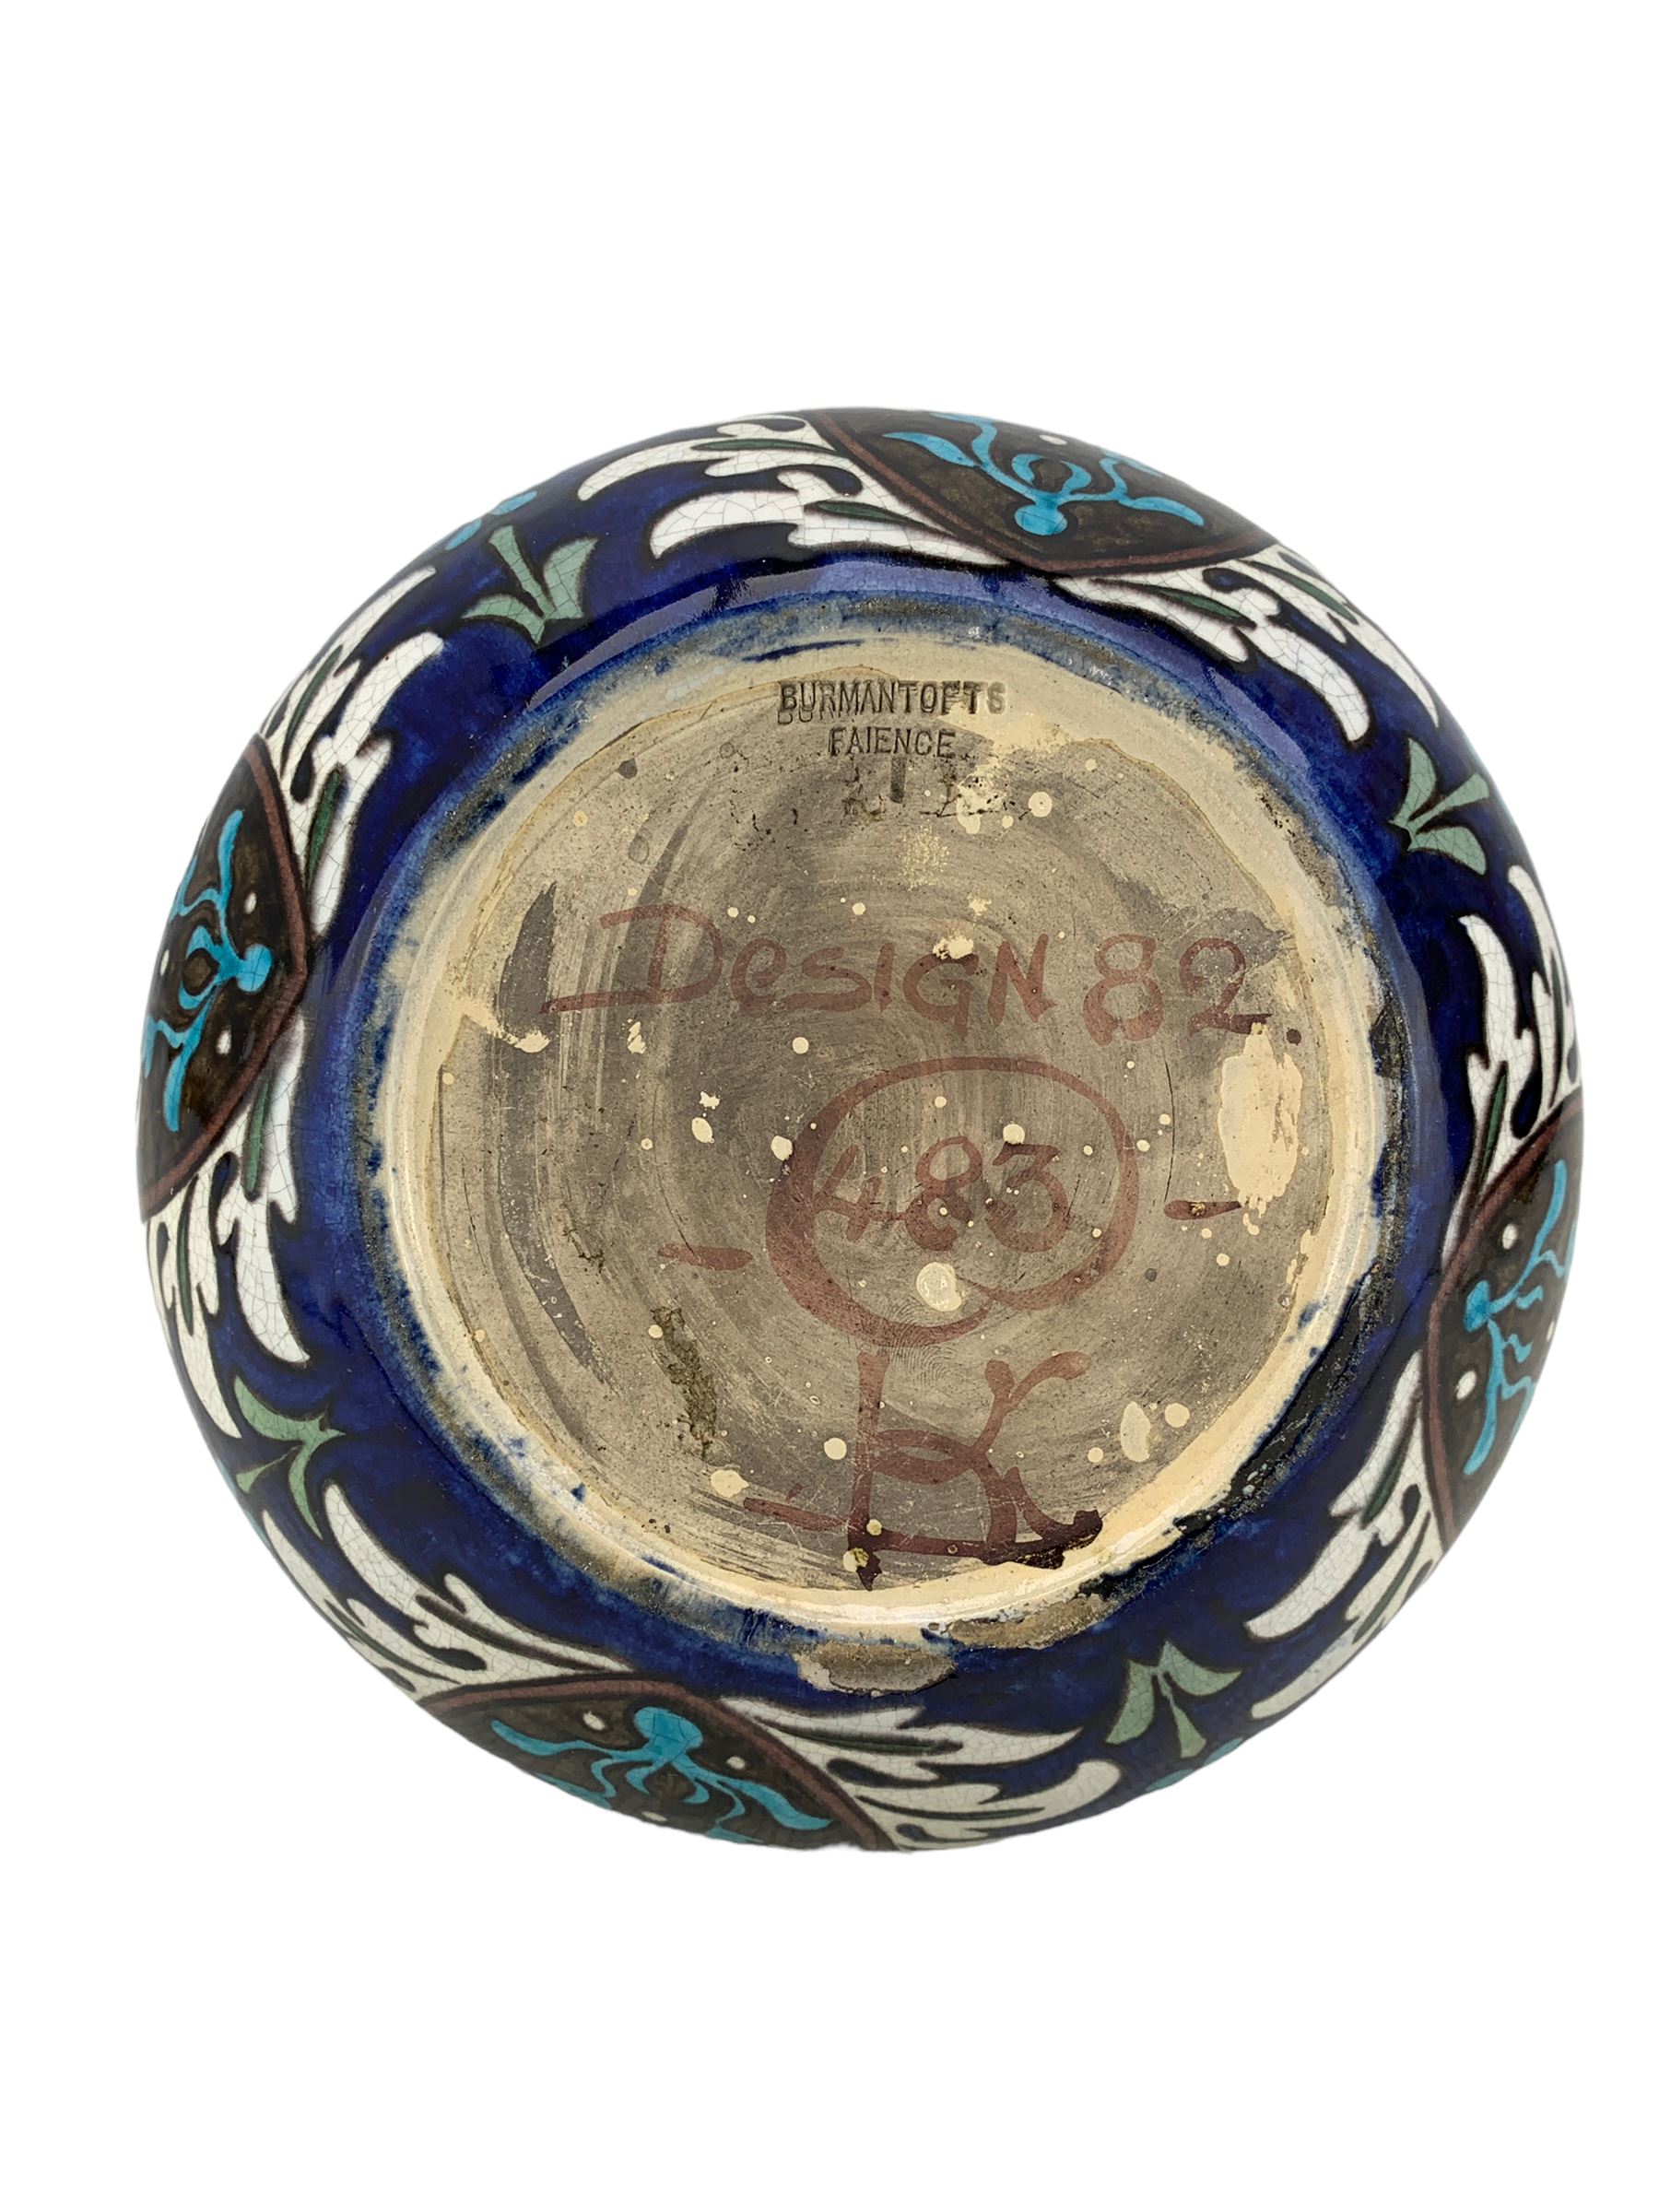 Burmantofts Faience Anglo-Persian bottle vase - Image 7 of 7